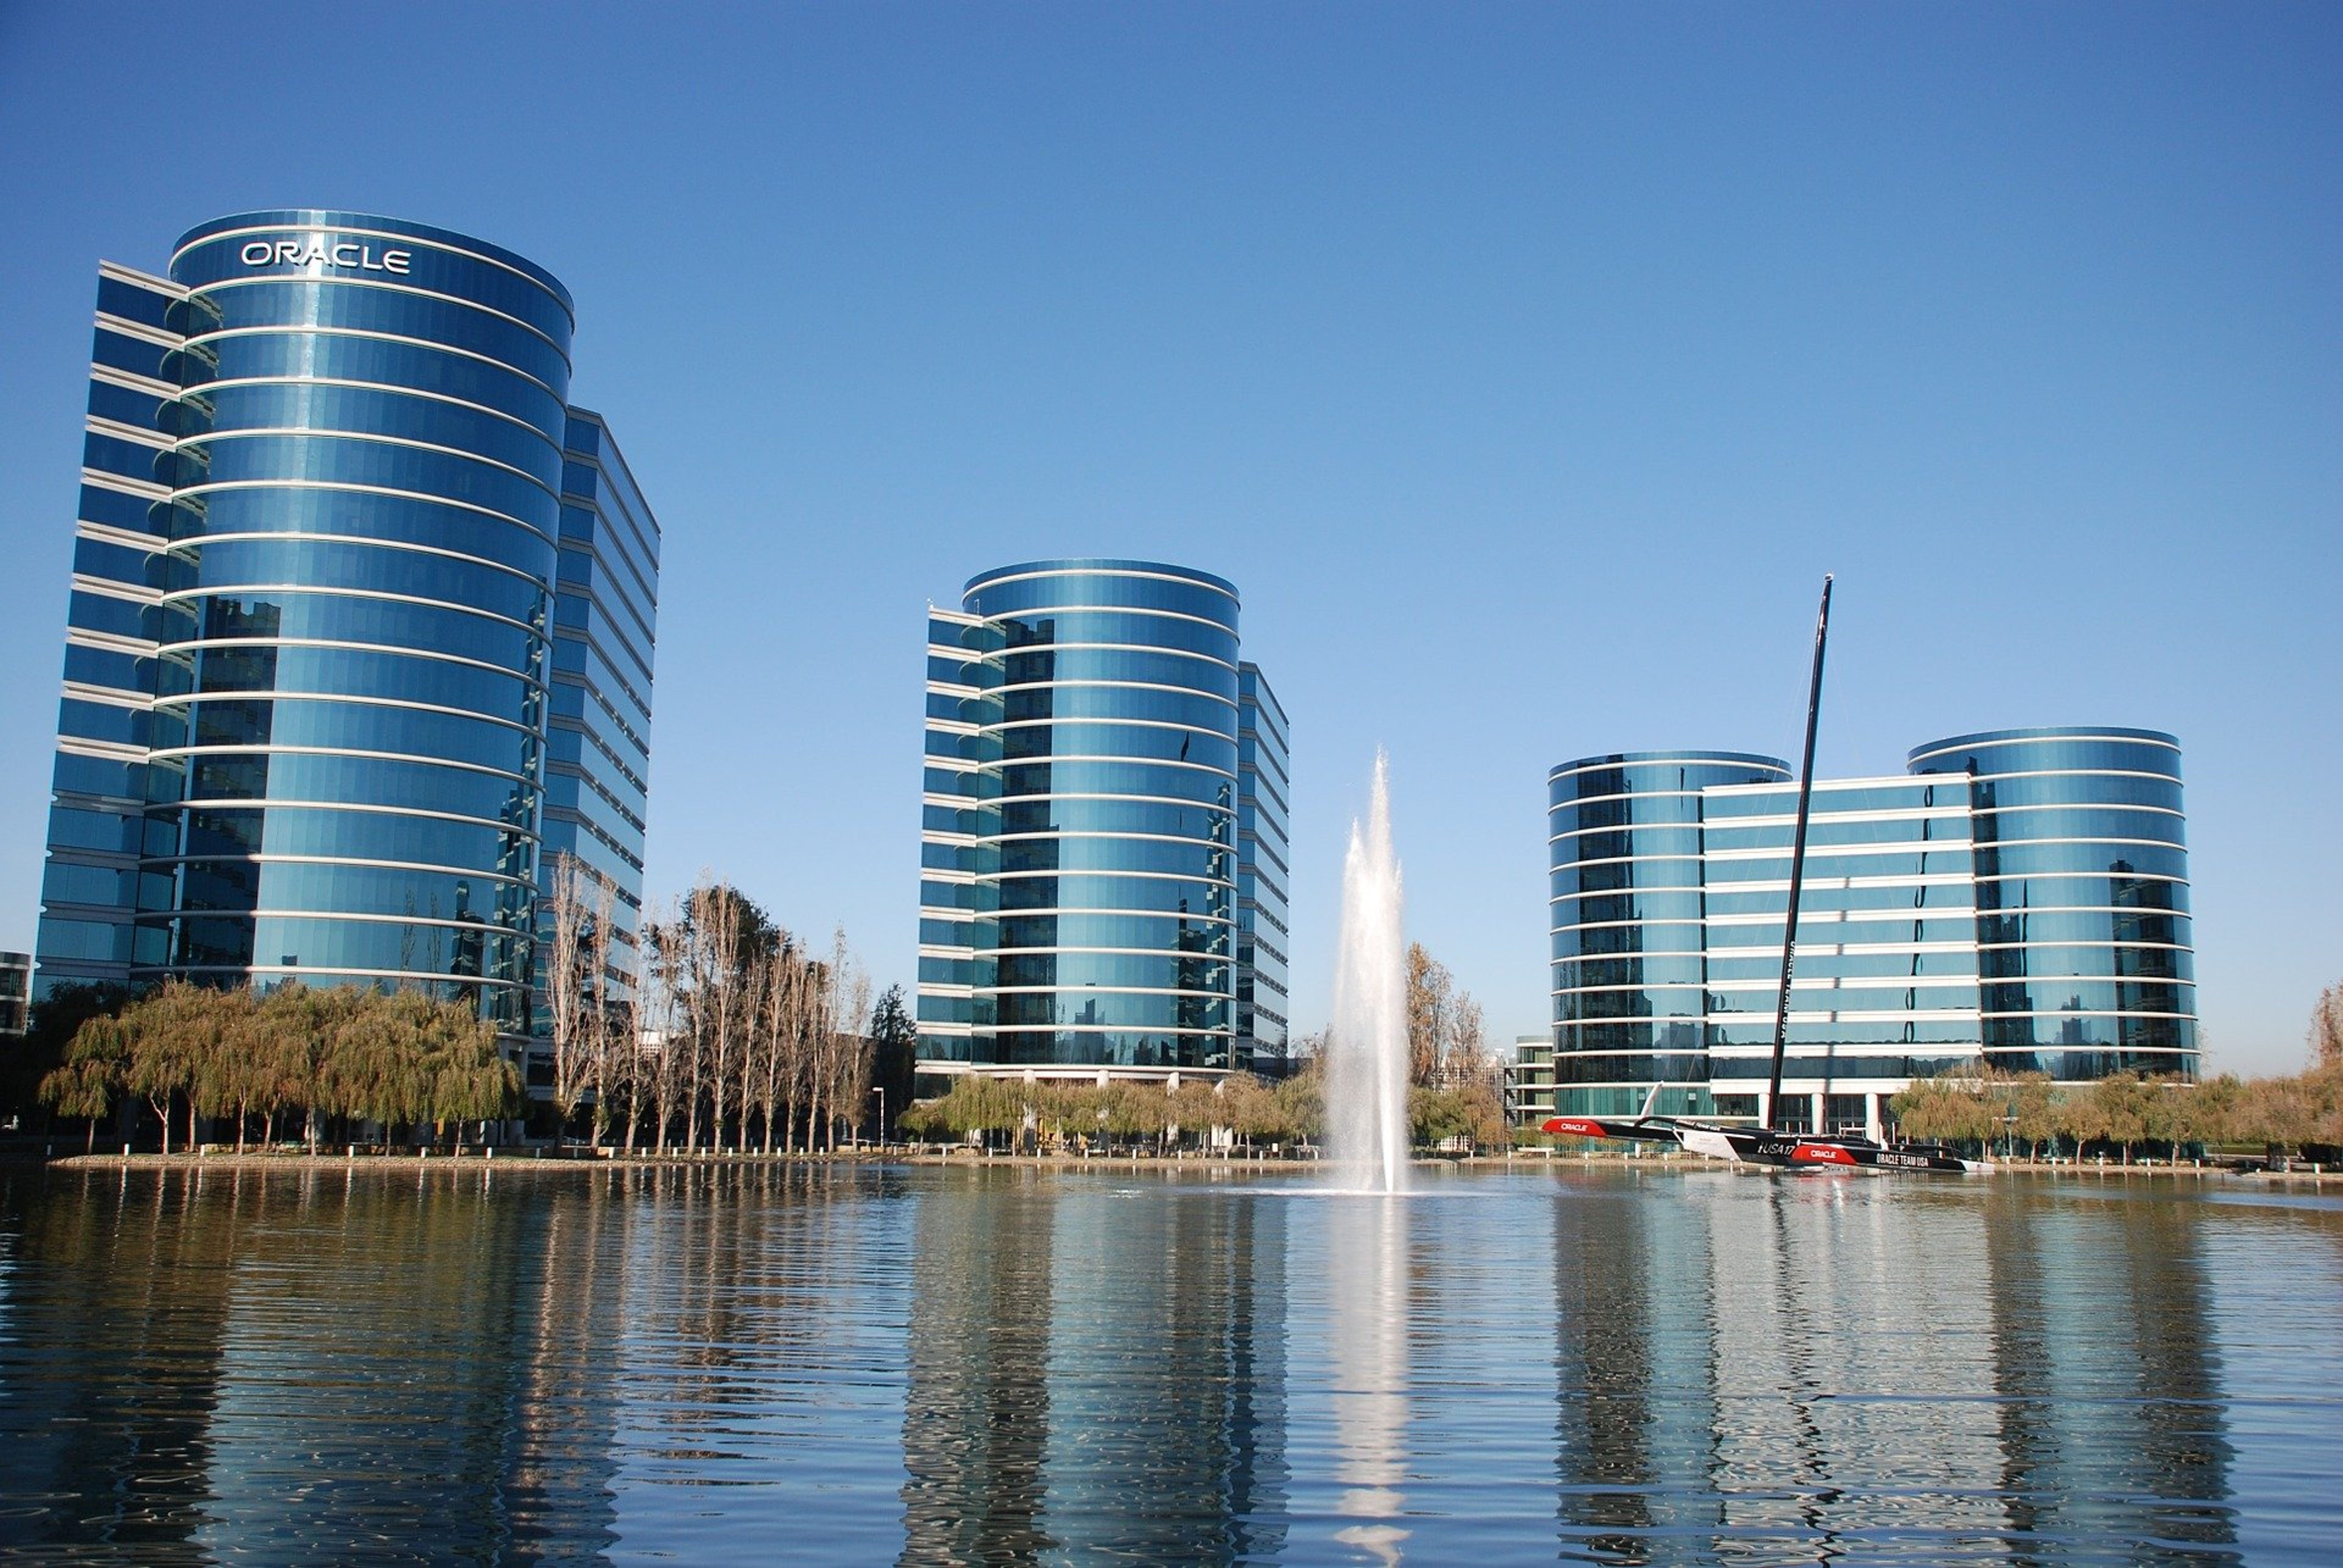 Tech Earnings In Focus This Week With Oracle, Adobe Both Expected To Report